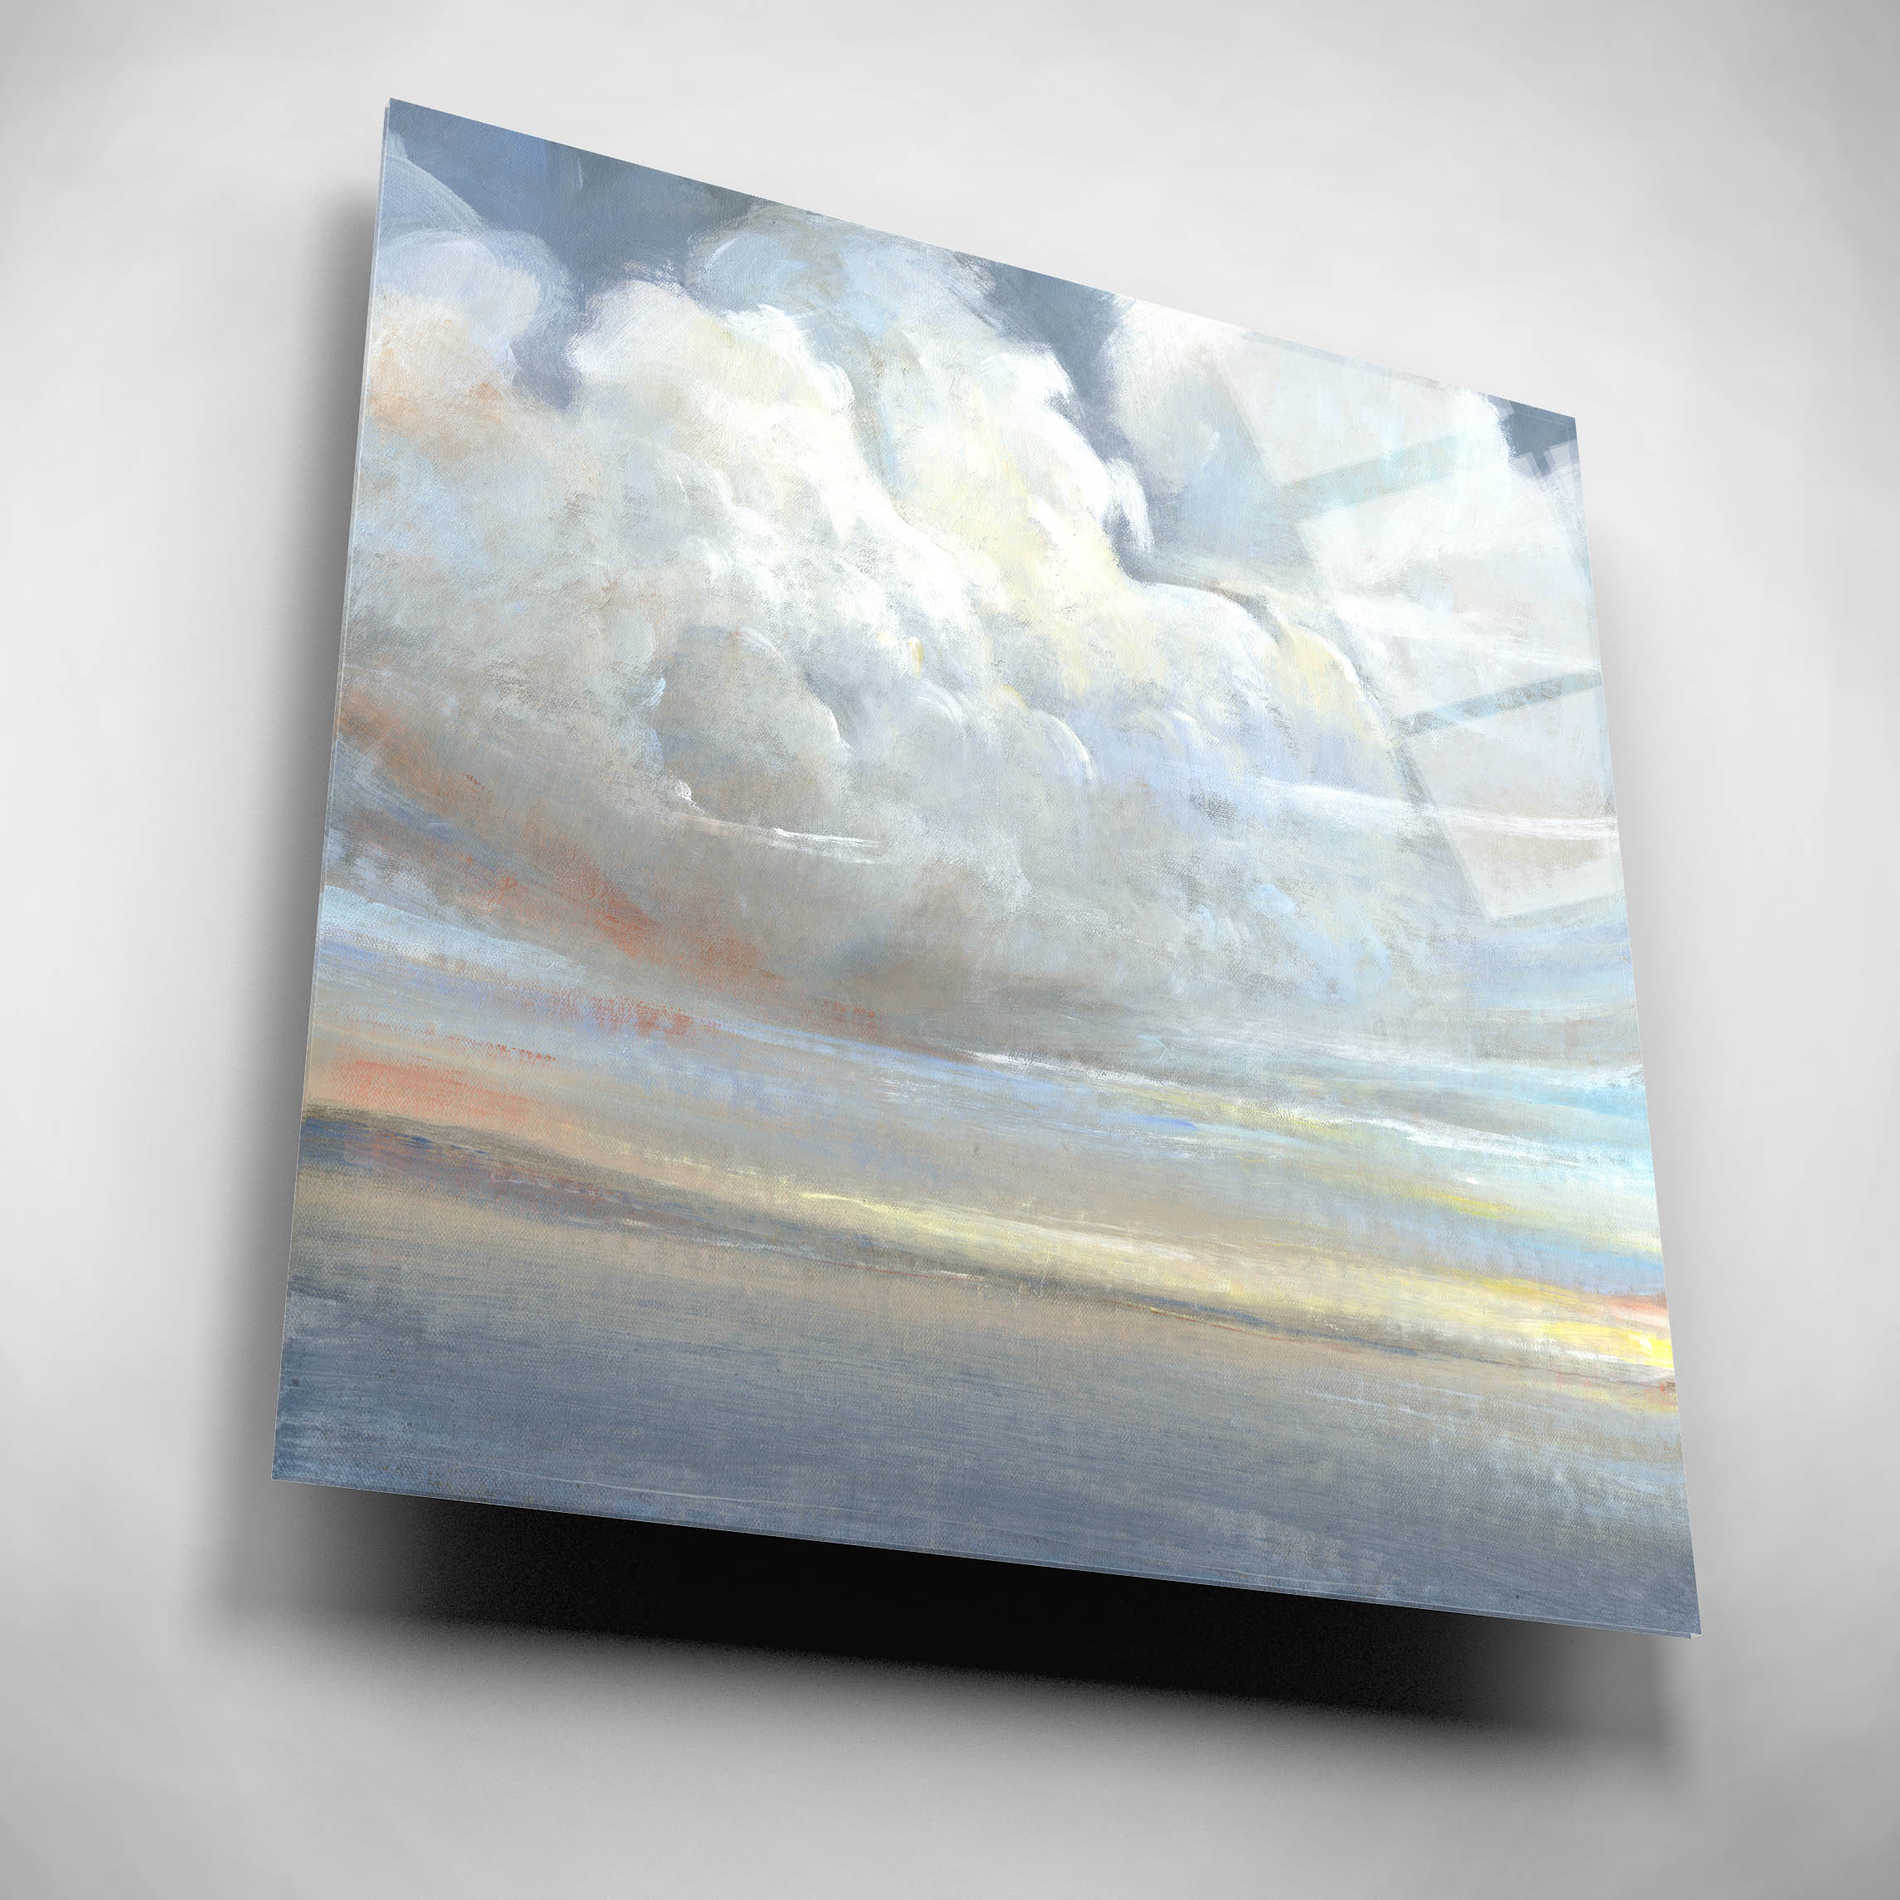 Epic Art 'Passing Storm II' by Tim O'Toole, Acrylic Glass Wall Art,12x12